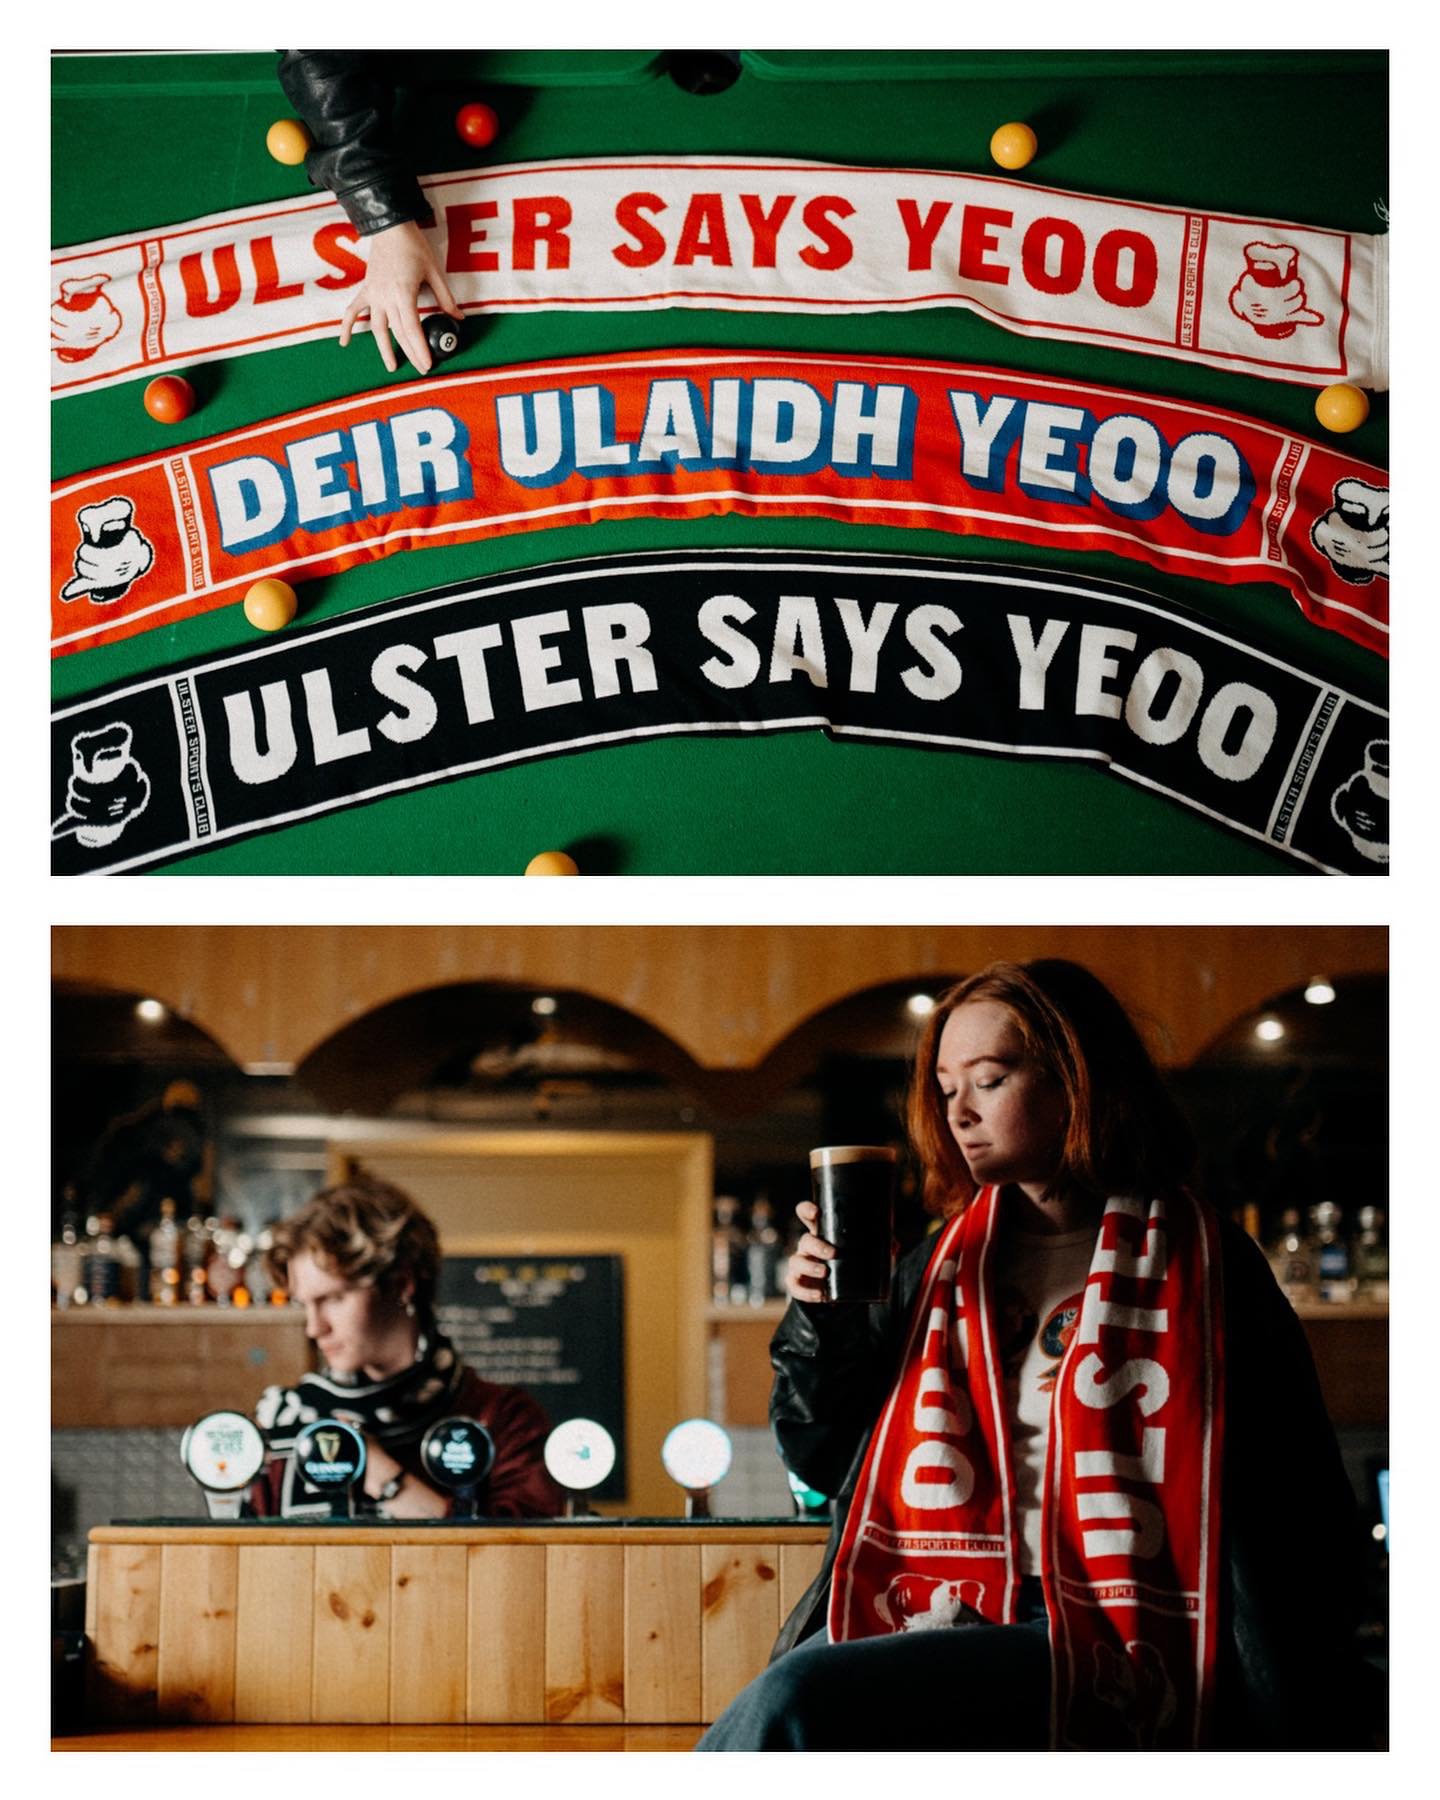 On location merch shots for @ulstersportsclub, keeps it visually interesting and matches the vibe of the bar.